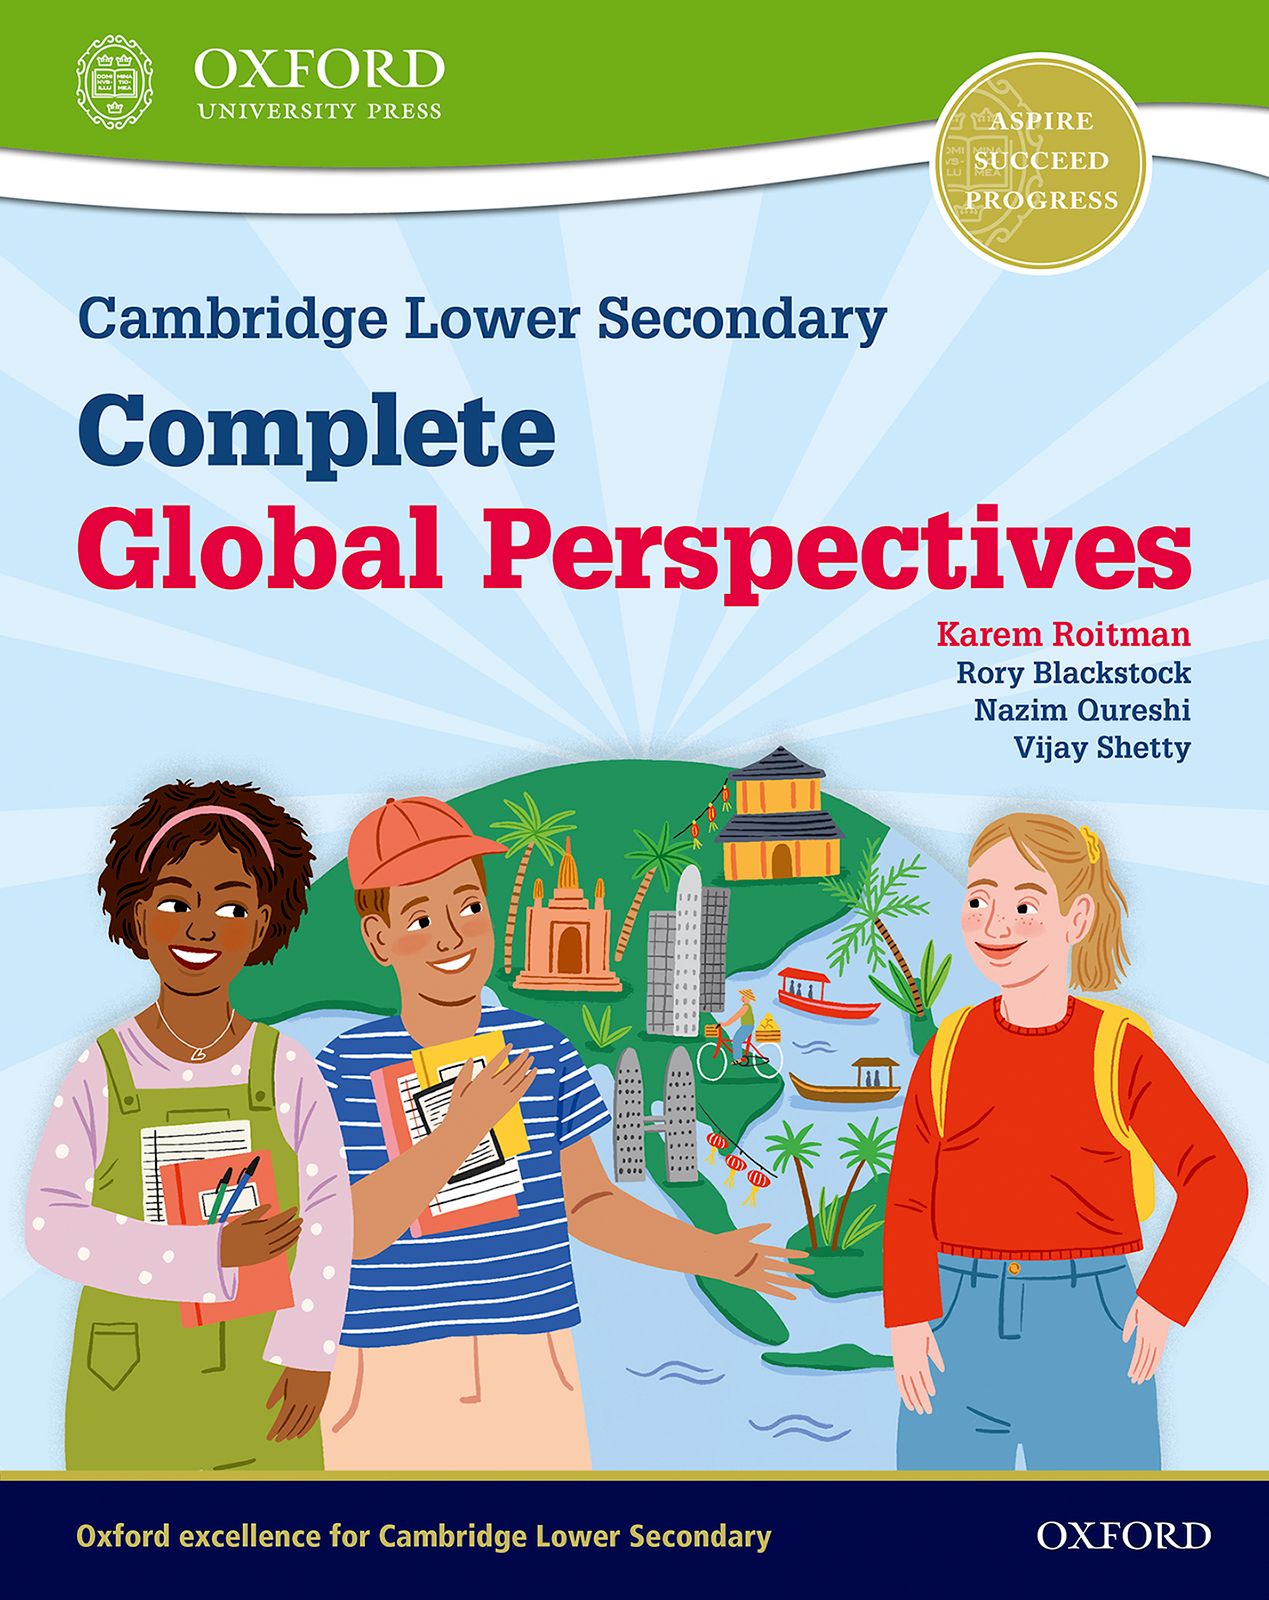 Featured image for “Cambridge Lower Secondary Complete Global Perspectives: Student Book”